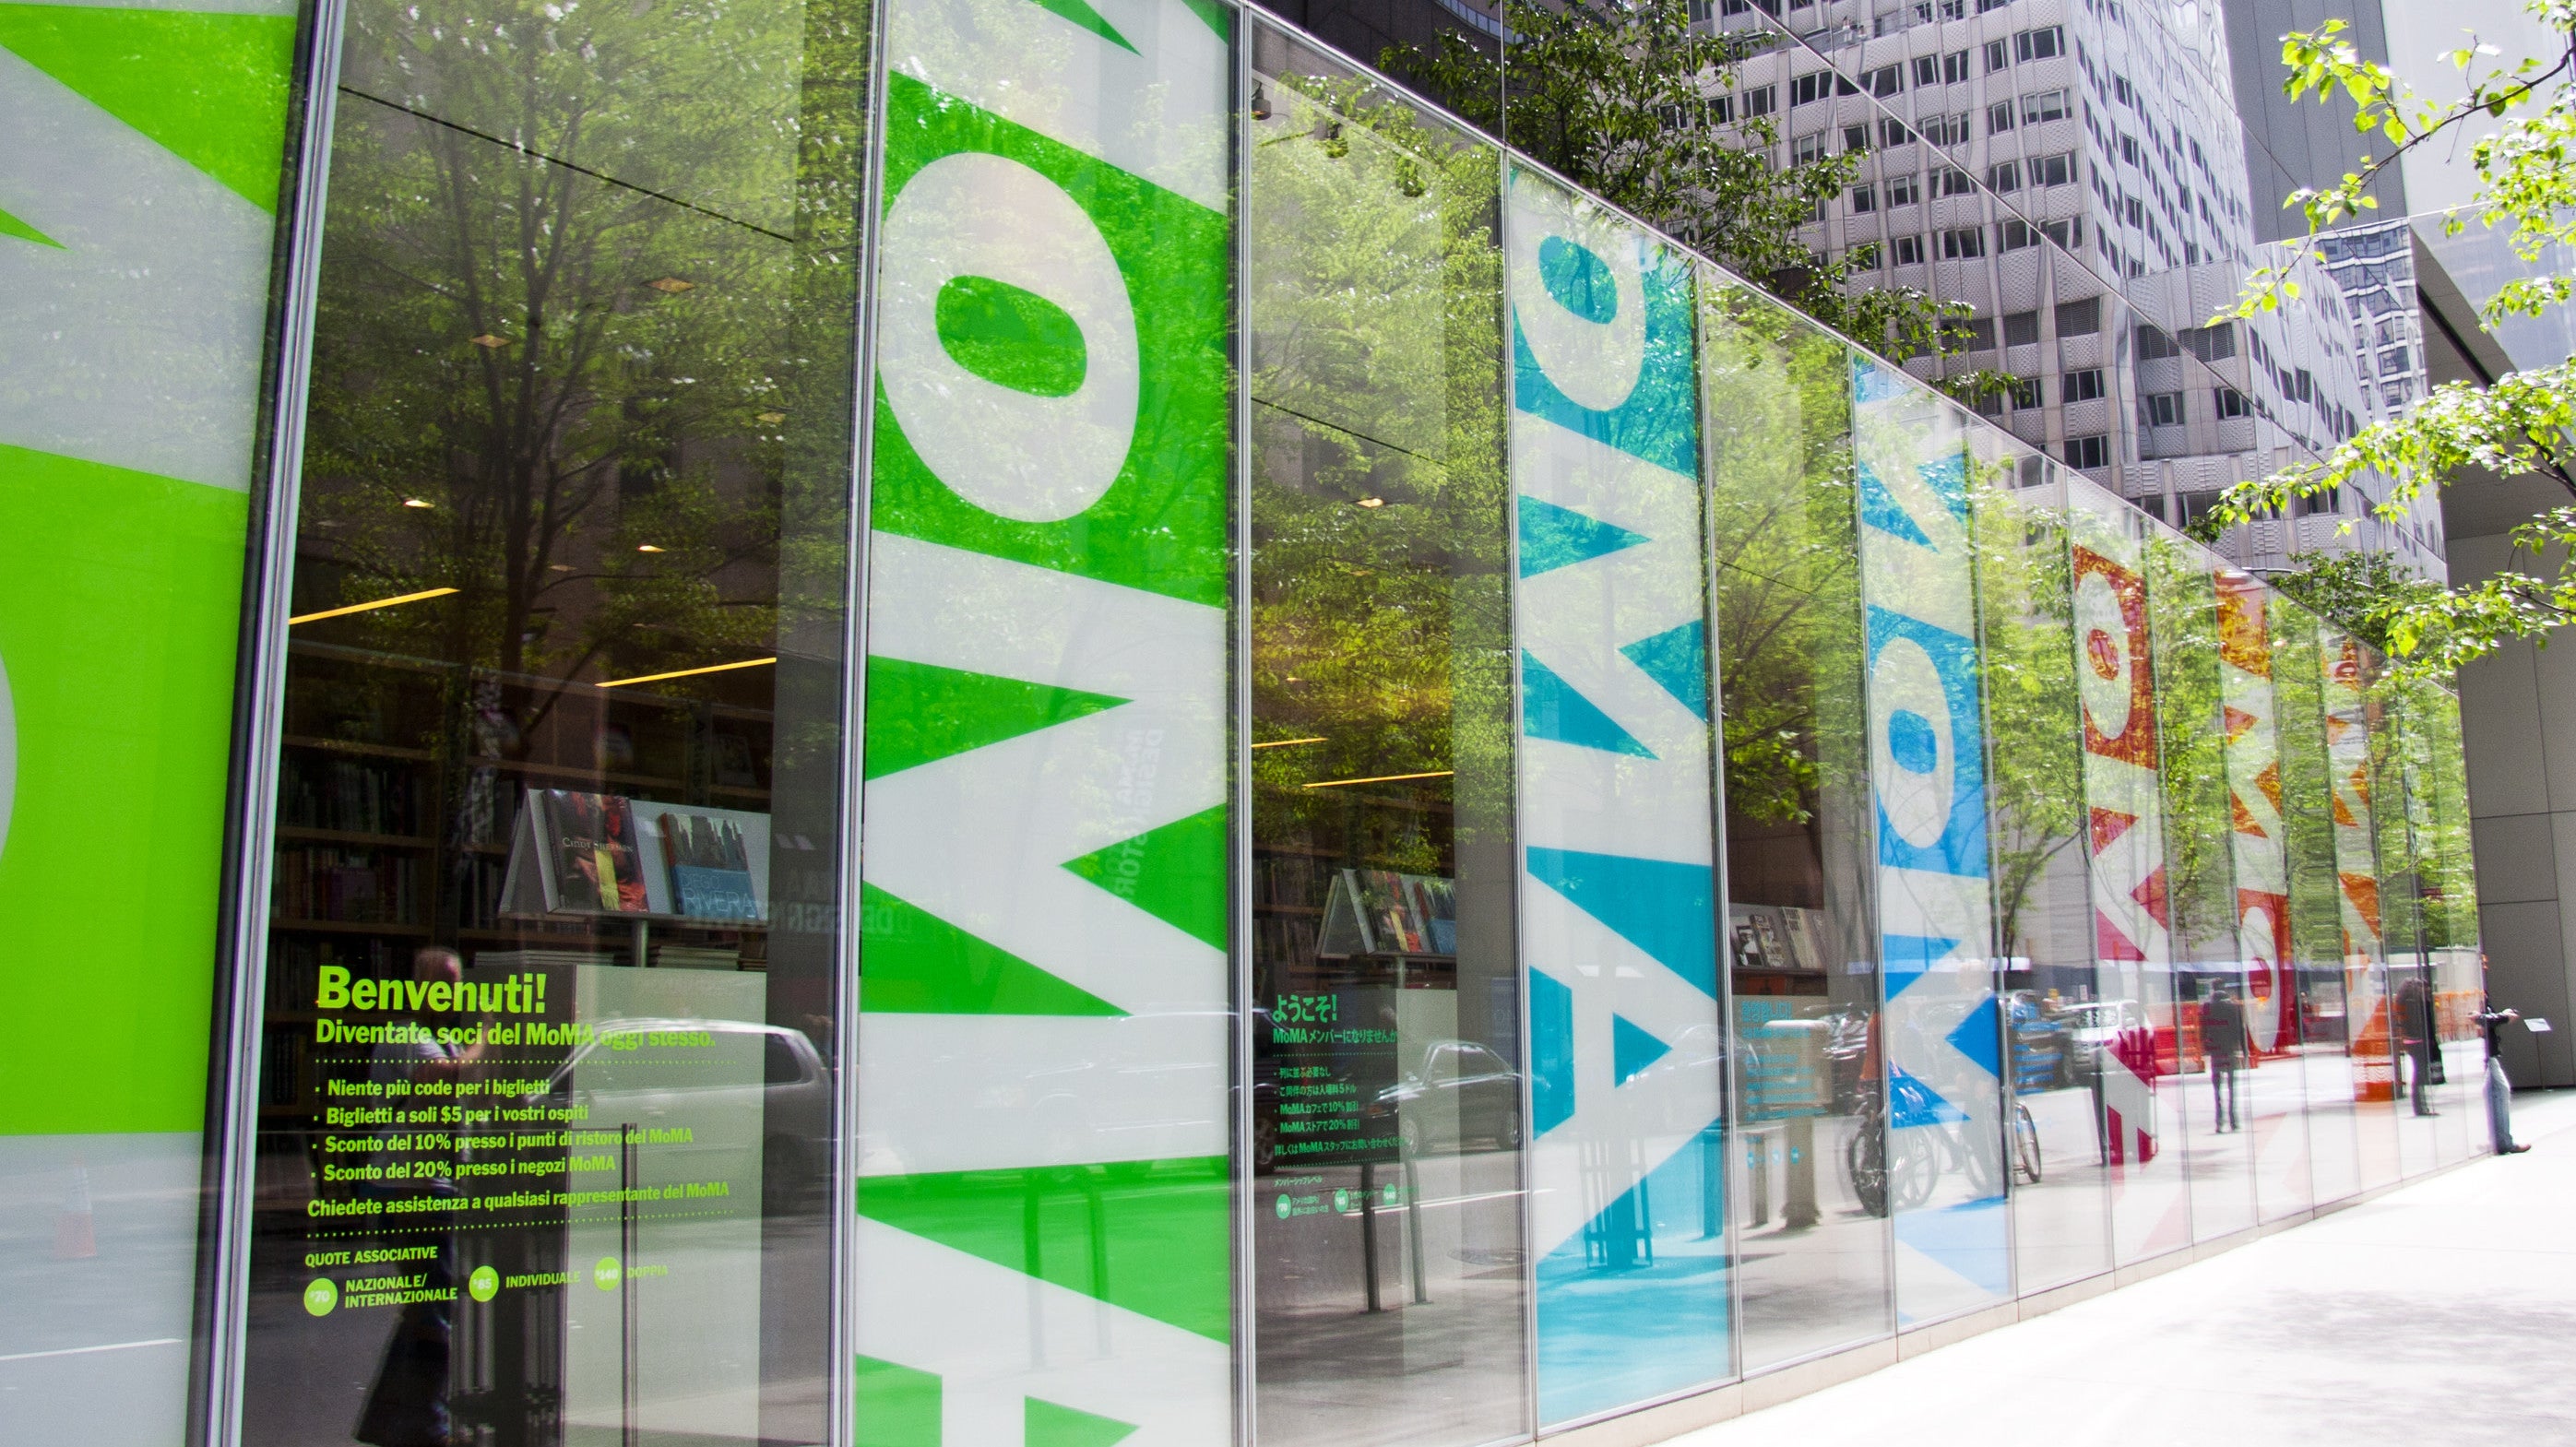 MoMA Now Offers Free Art Classes Online